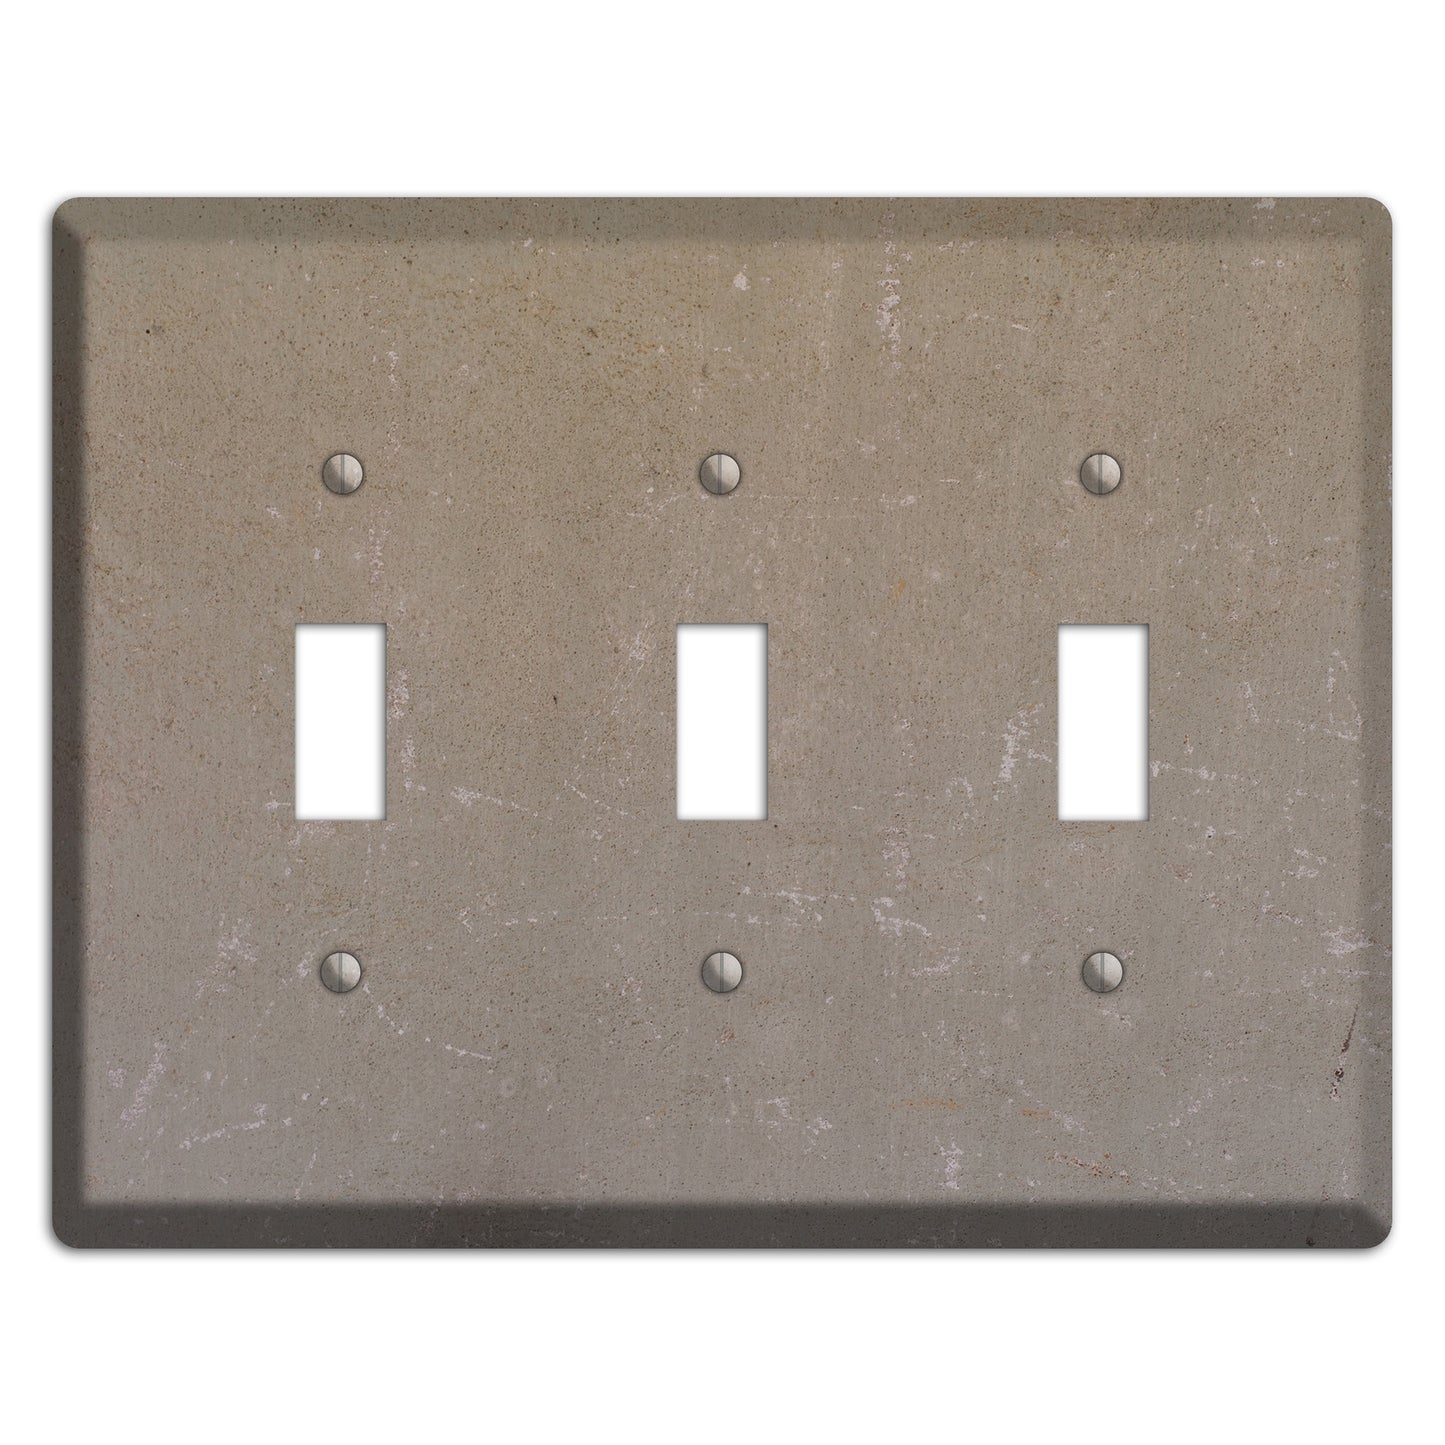 Old Concrete 6 3 Toggle Wallplate